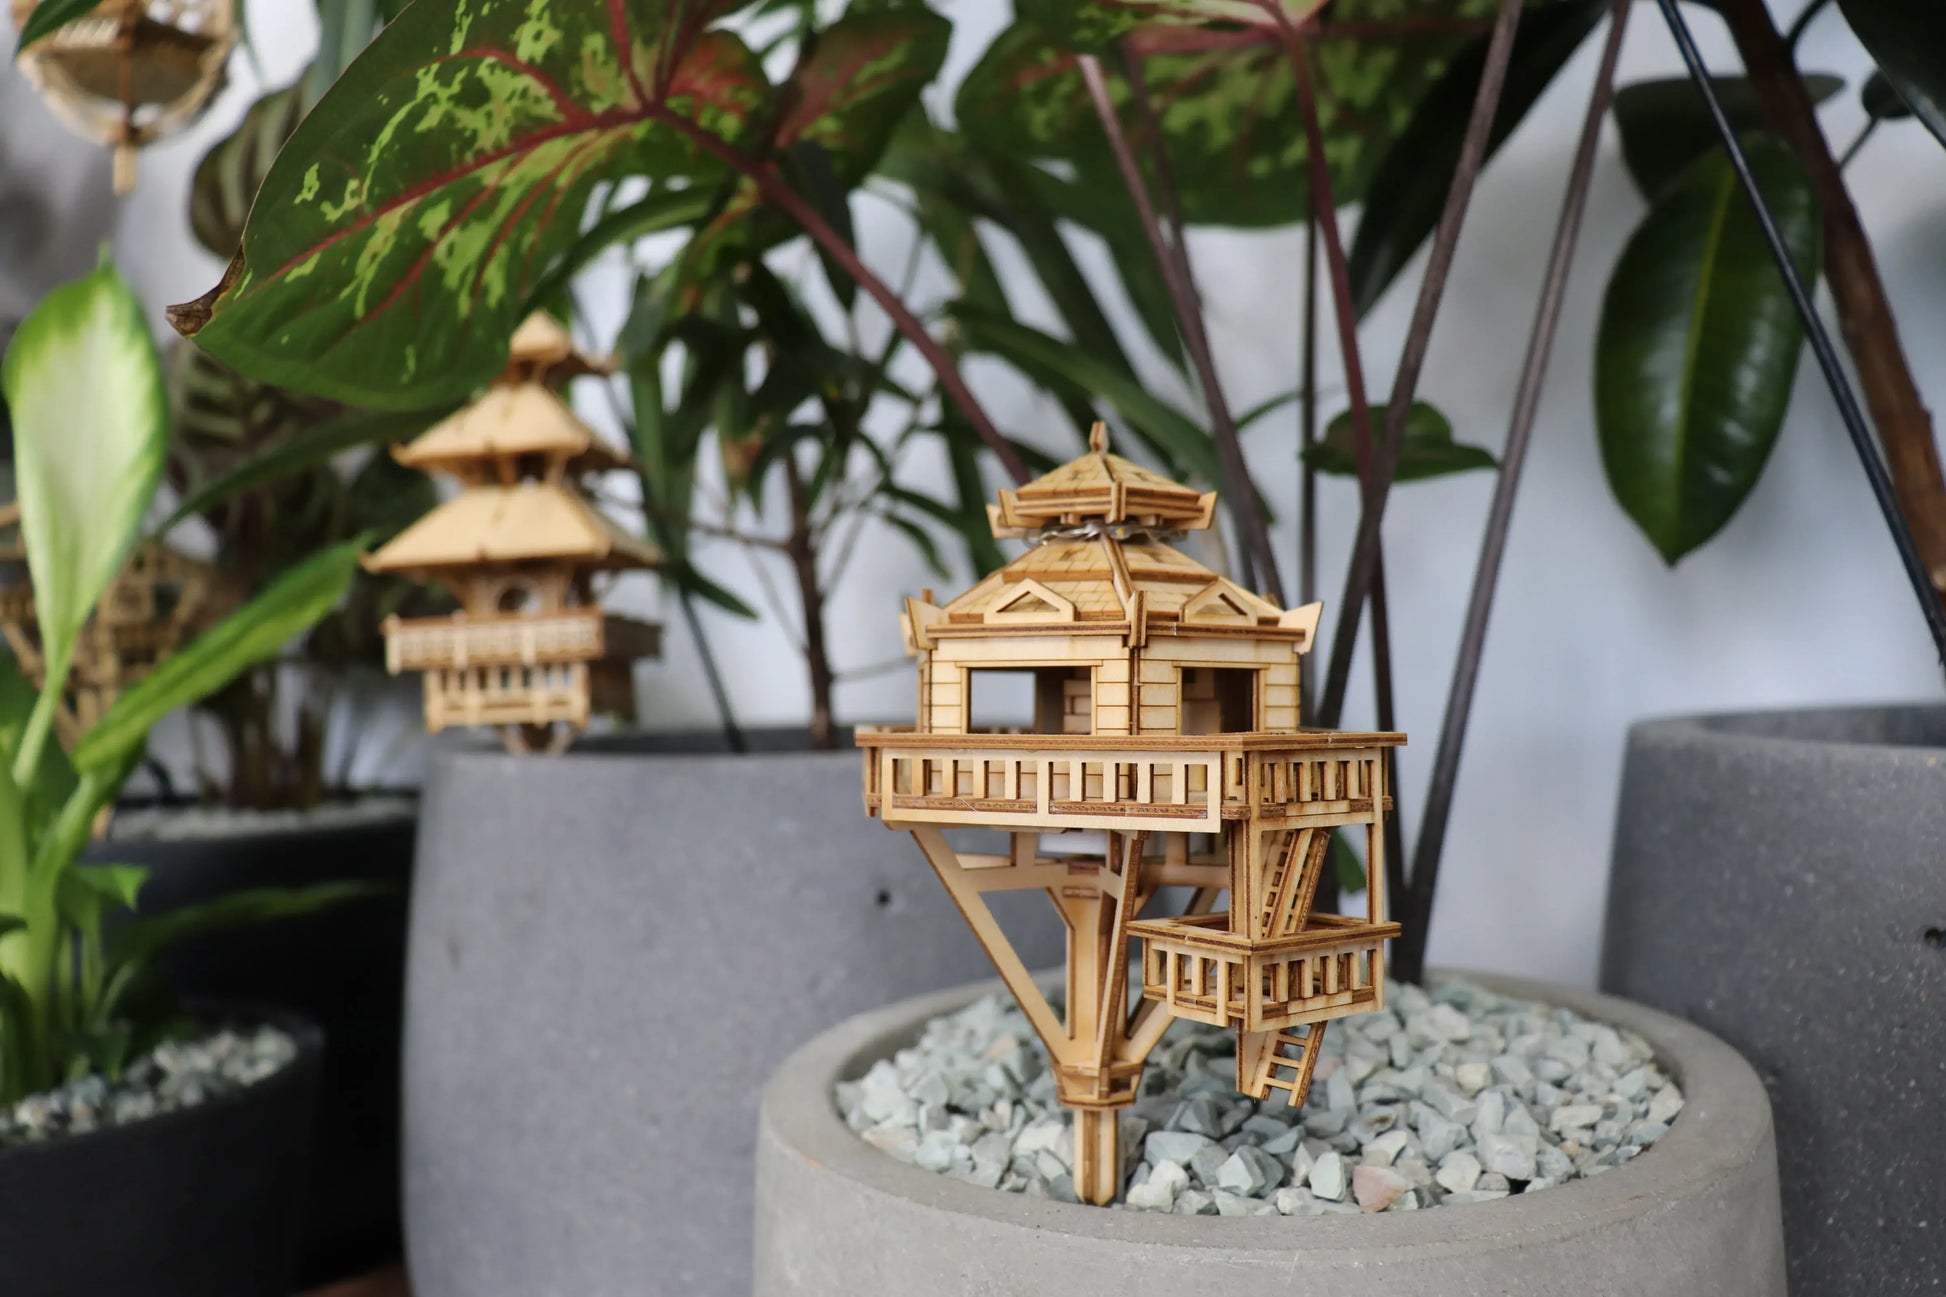 Two small wooden treehouses in potted plants.